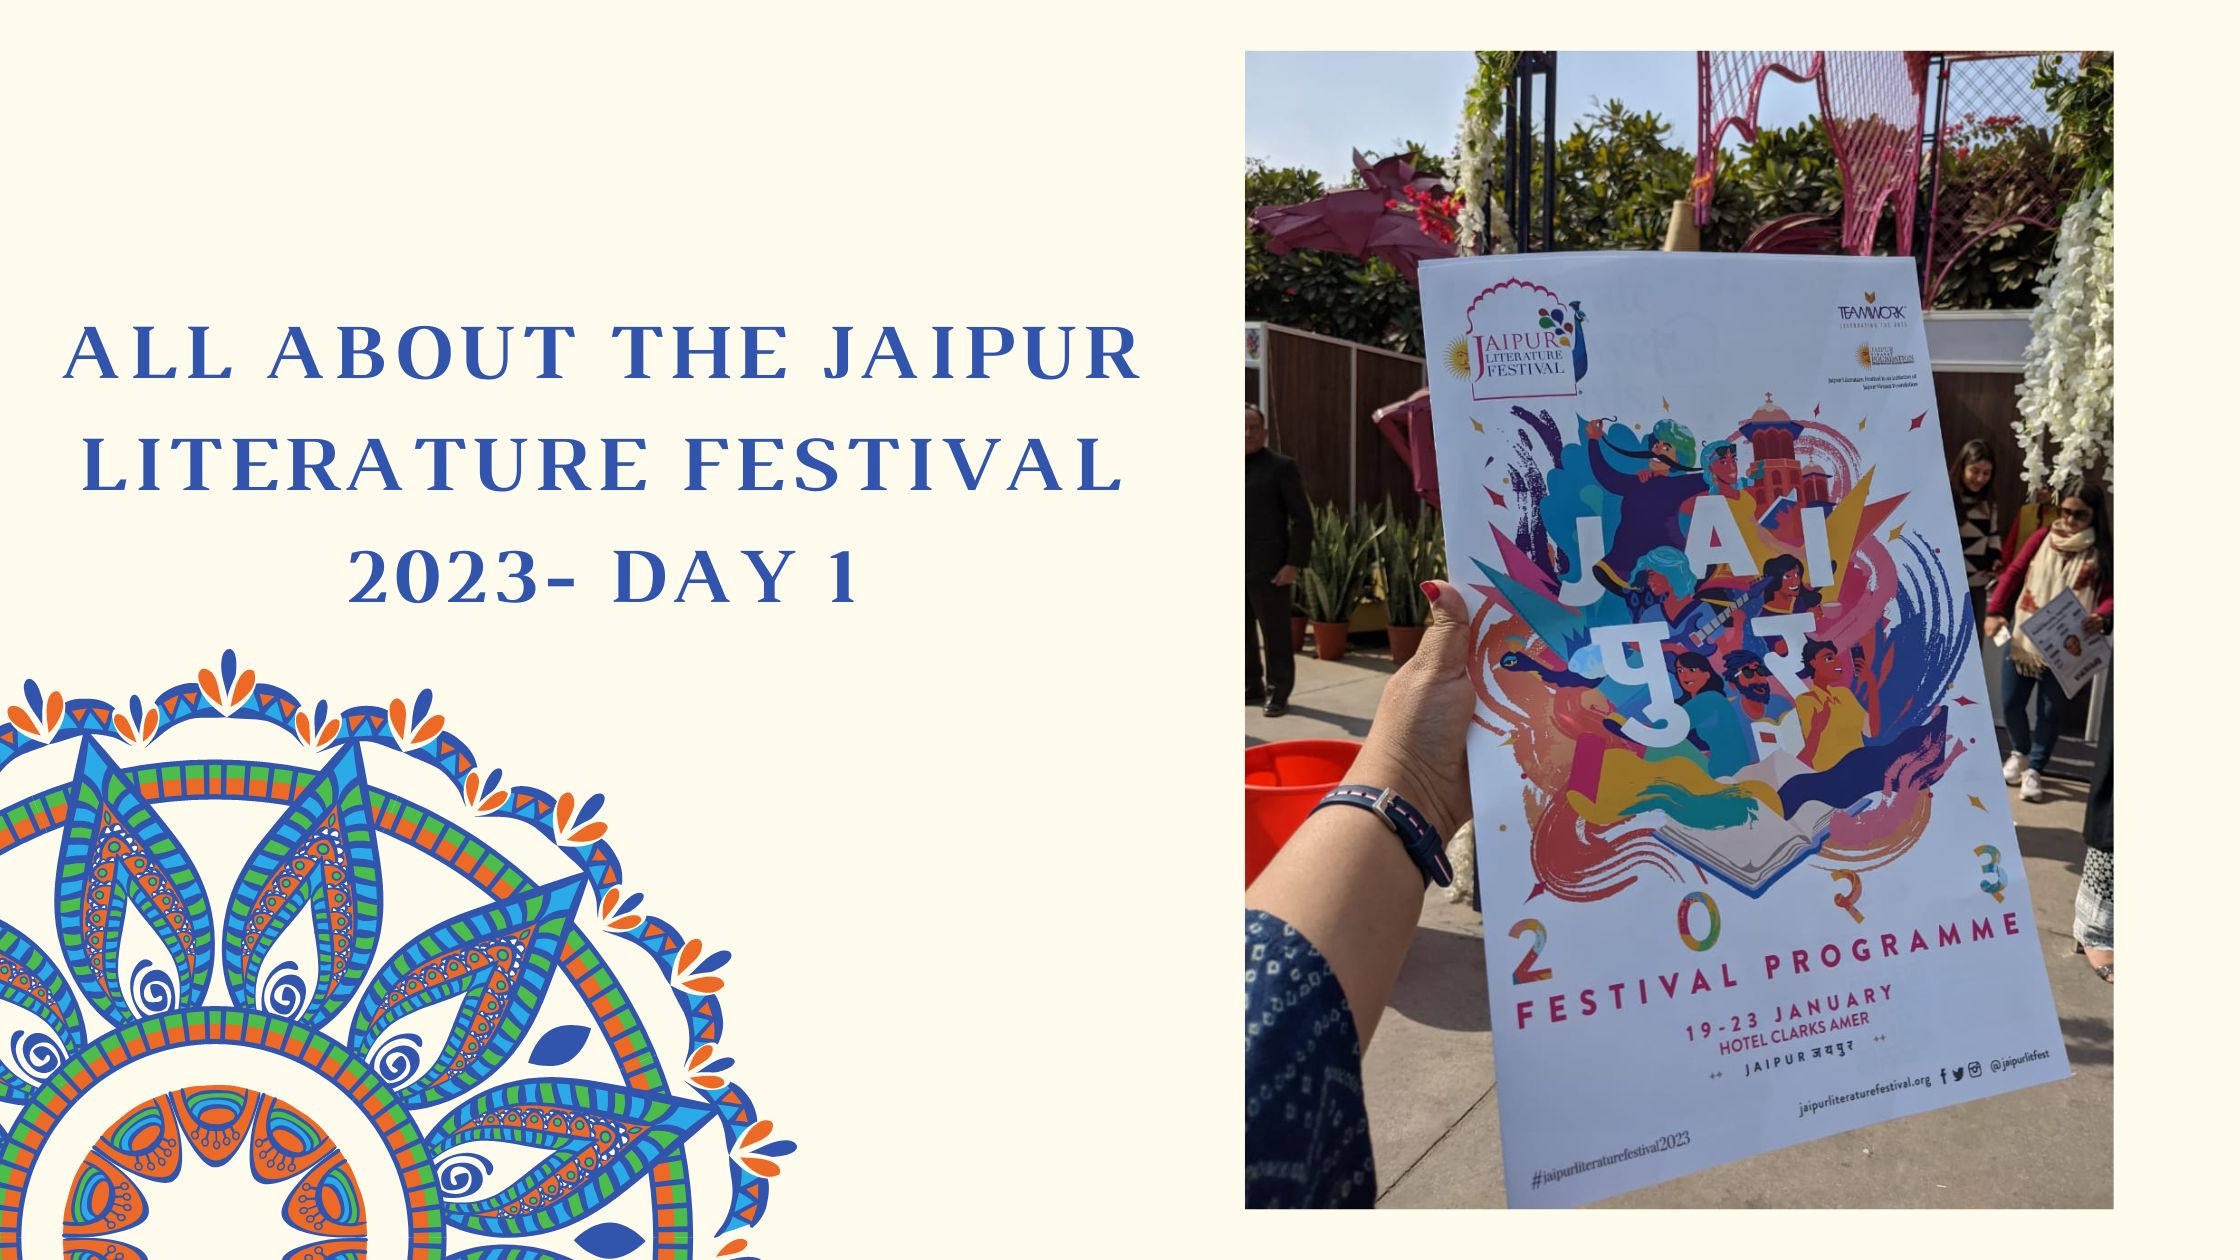 All about The Jaipur Literature Festival 2023- Day 1